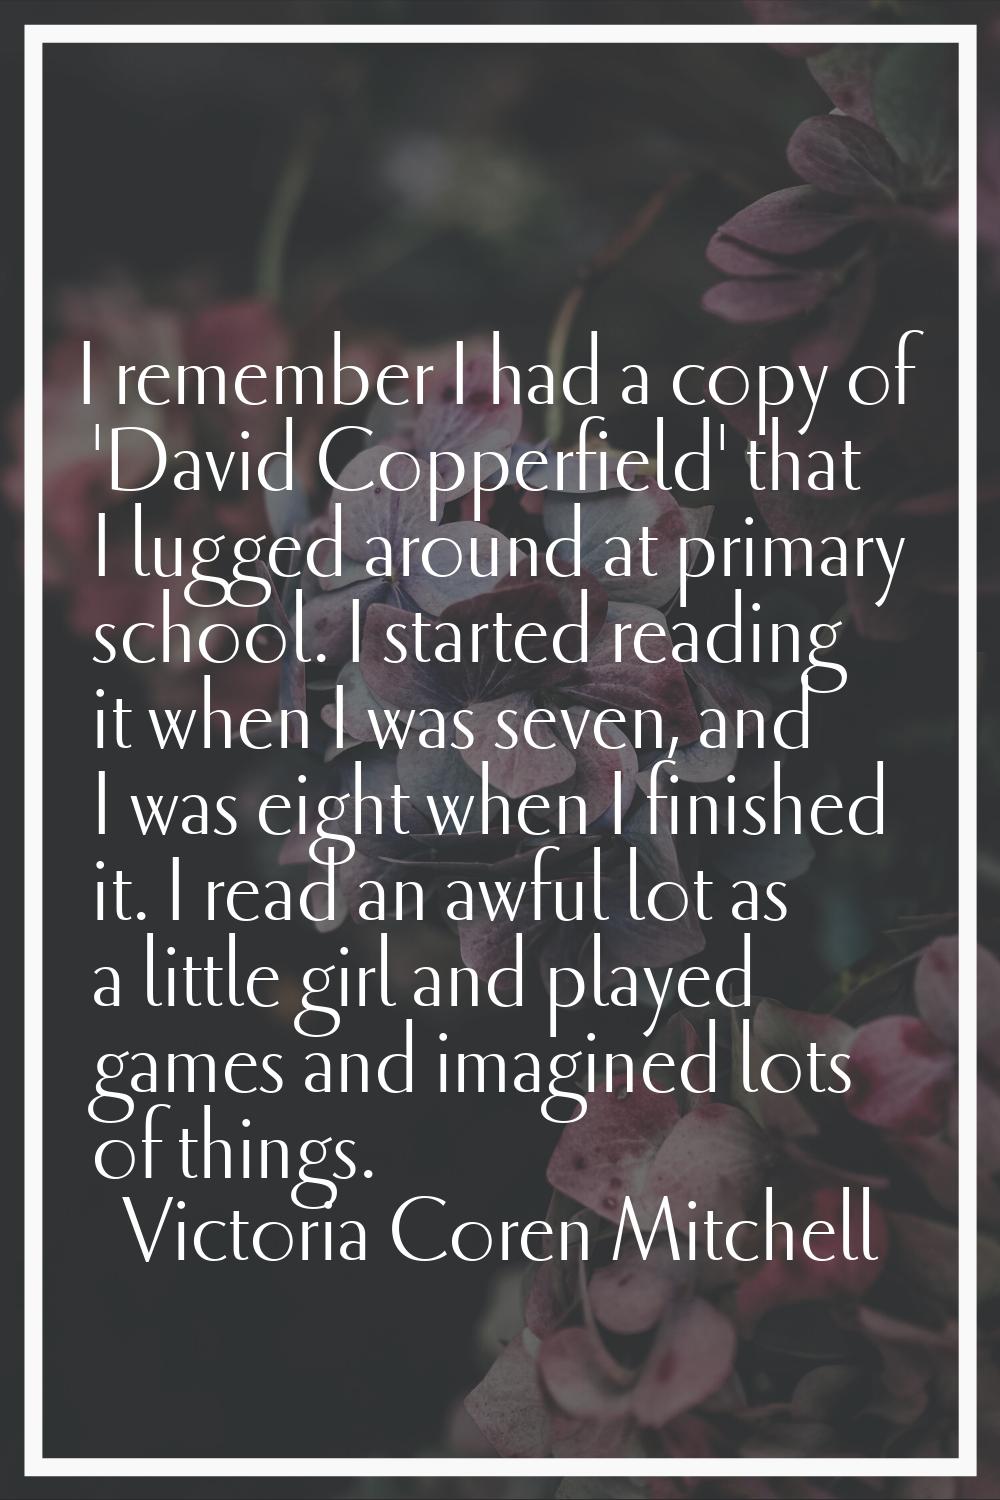 I remember I had a copy of 'David Copperfield' that I lugged around at primary school. I started re